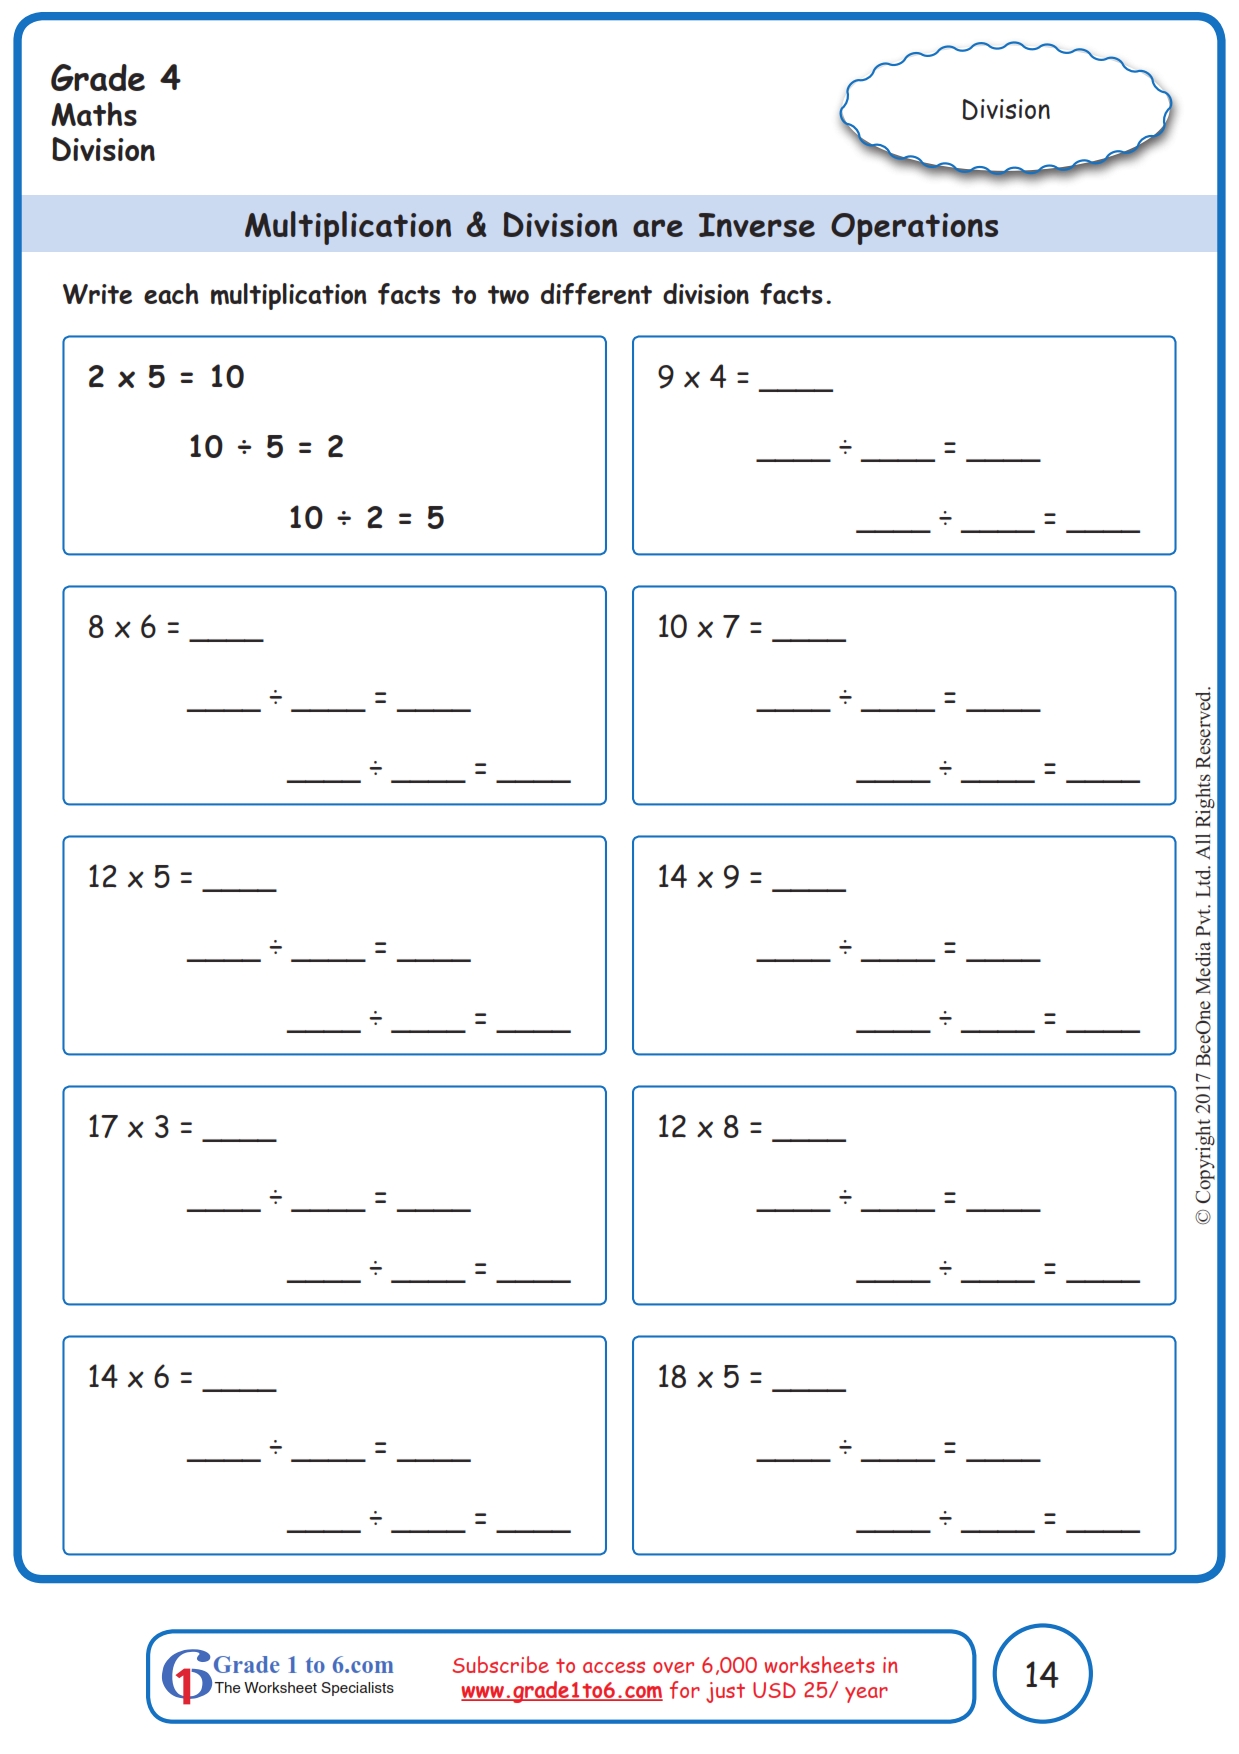 inverse-operations-multiplication-division-www-grade1to6